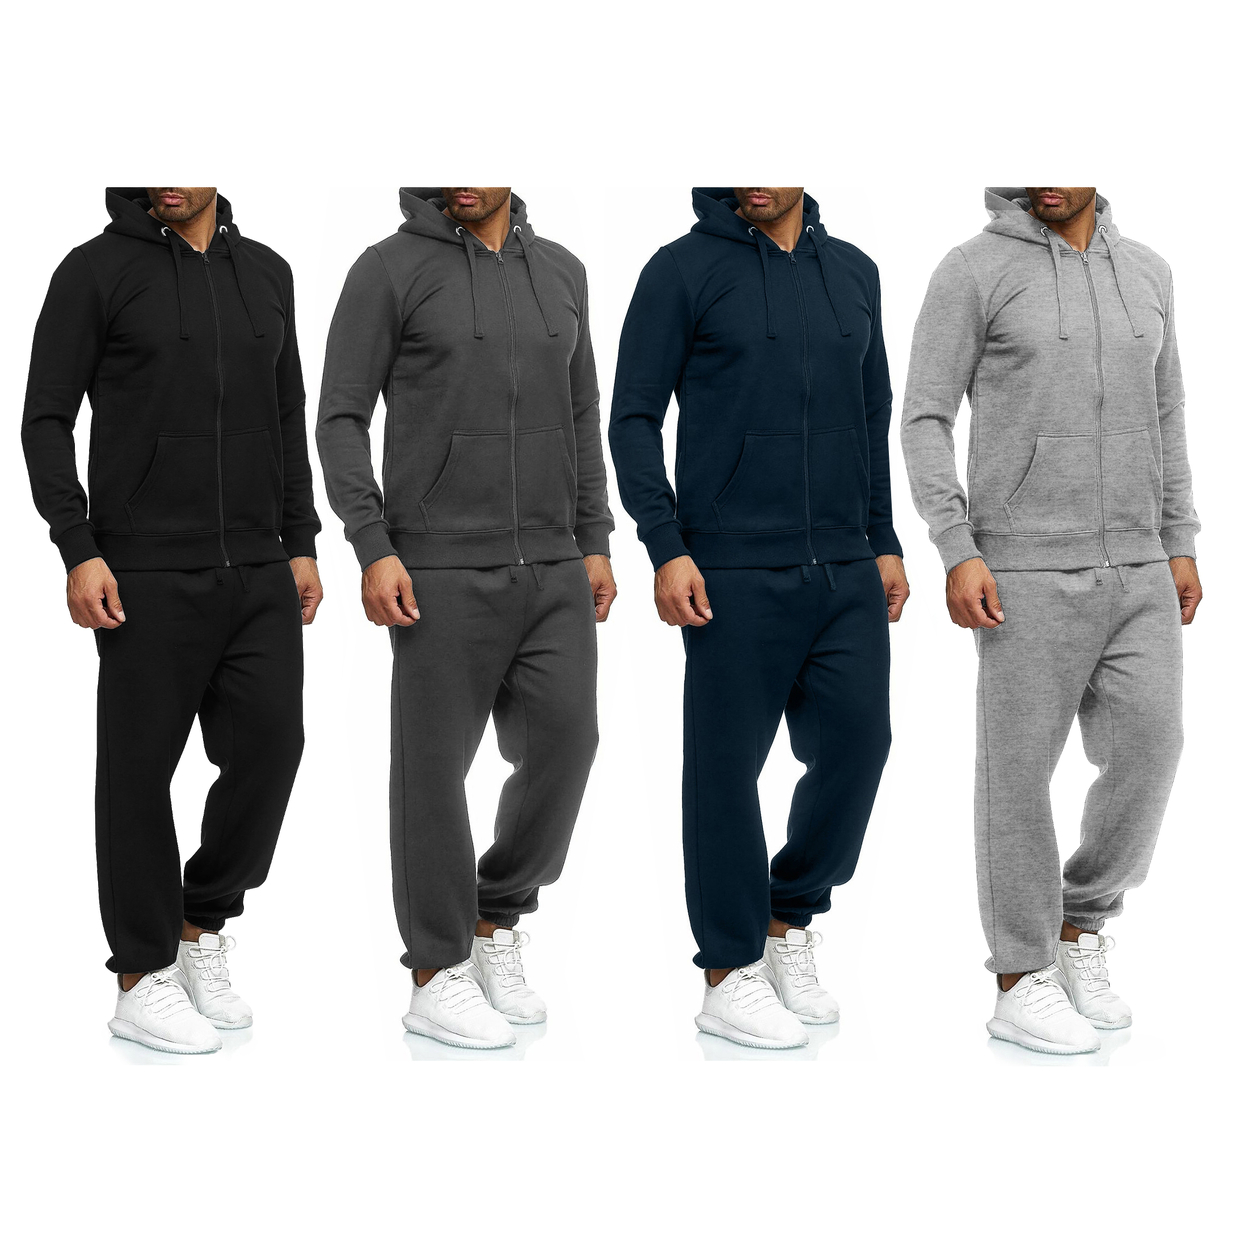 2-Pack: Men's Casual Big & Tall Athletic Active Winter Warm Fleece Lined Full Zip Tracksuit Jogger Set - Charcoal, Xx-large